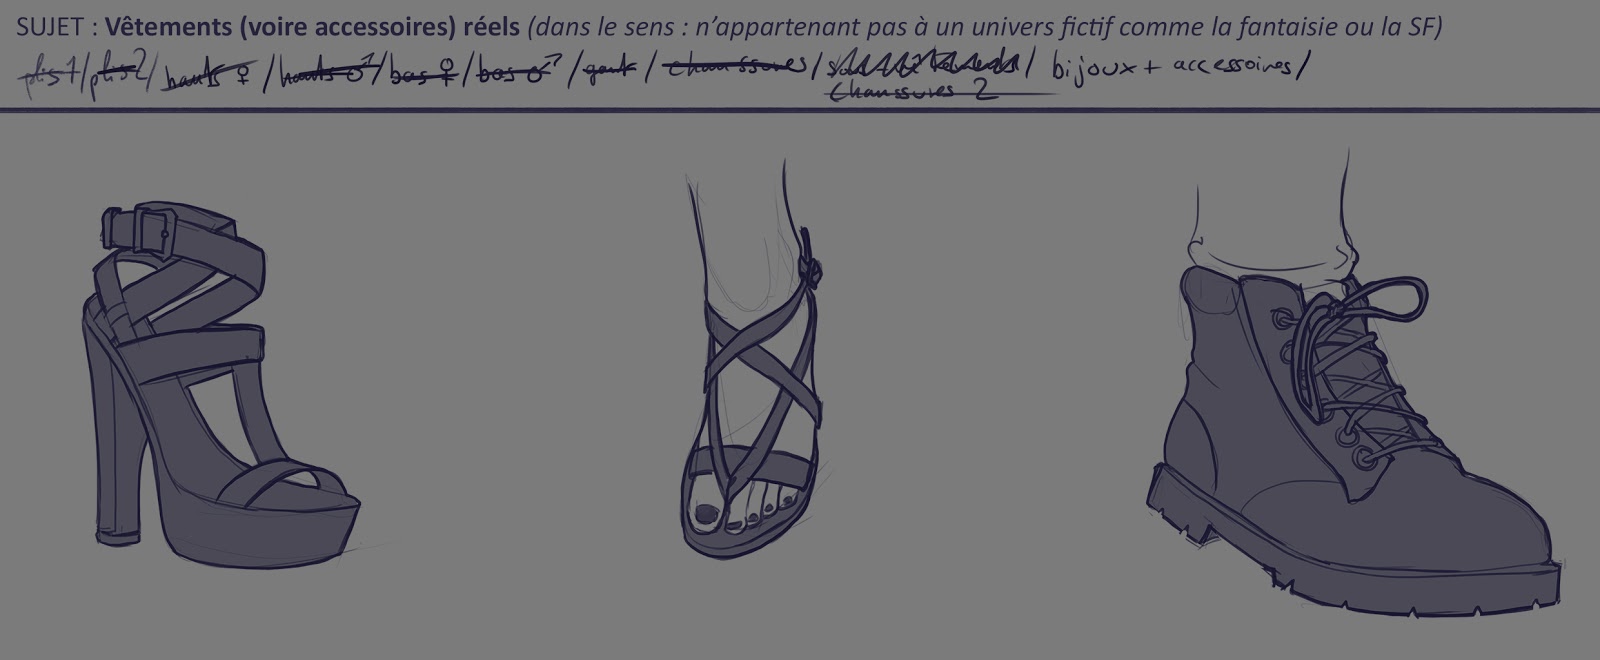 XaB au travail ! [nudity inside] - Page 7 J09-02-Observation_sujet_chaussures